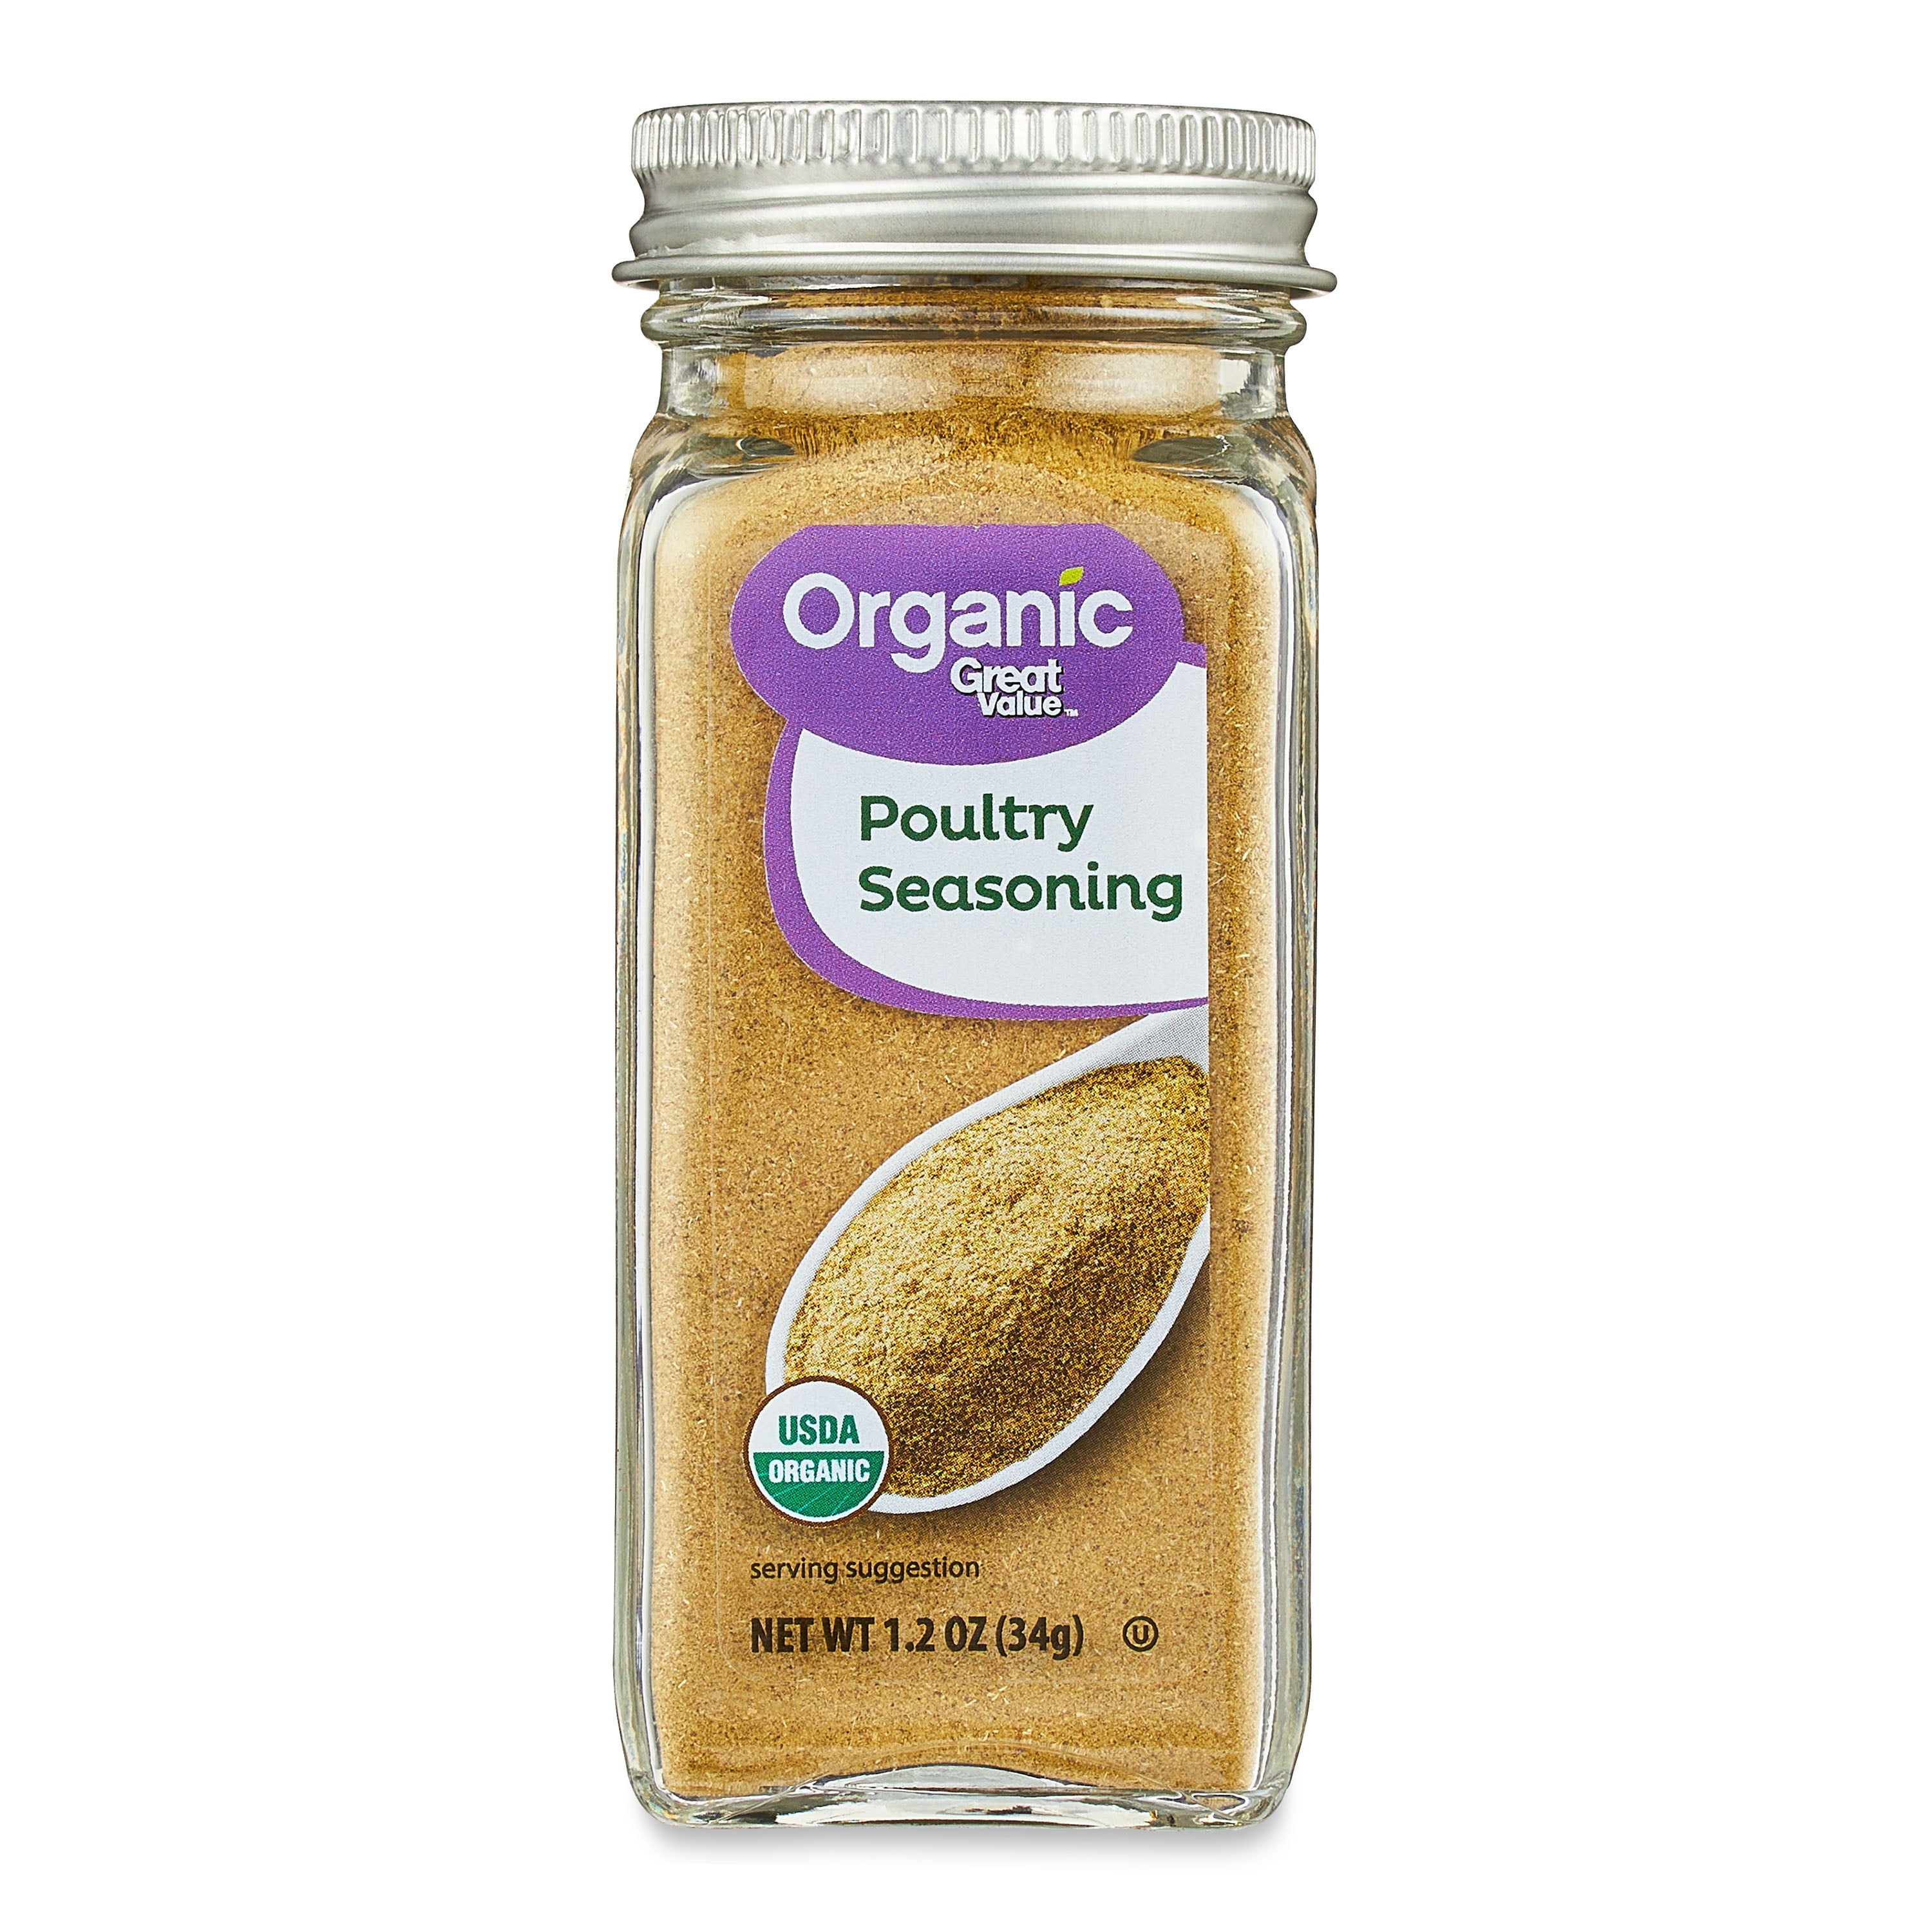 Great Value Organic Poultry Seasoning, 1.2 oz